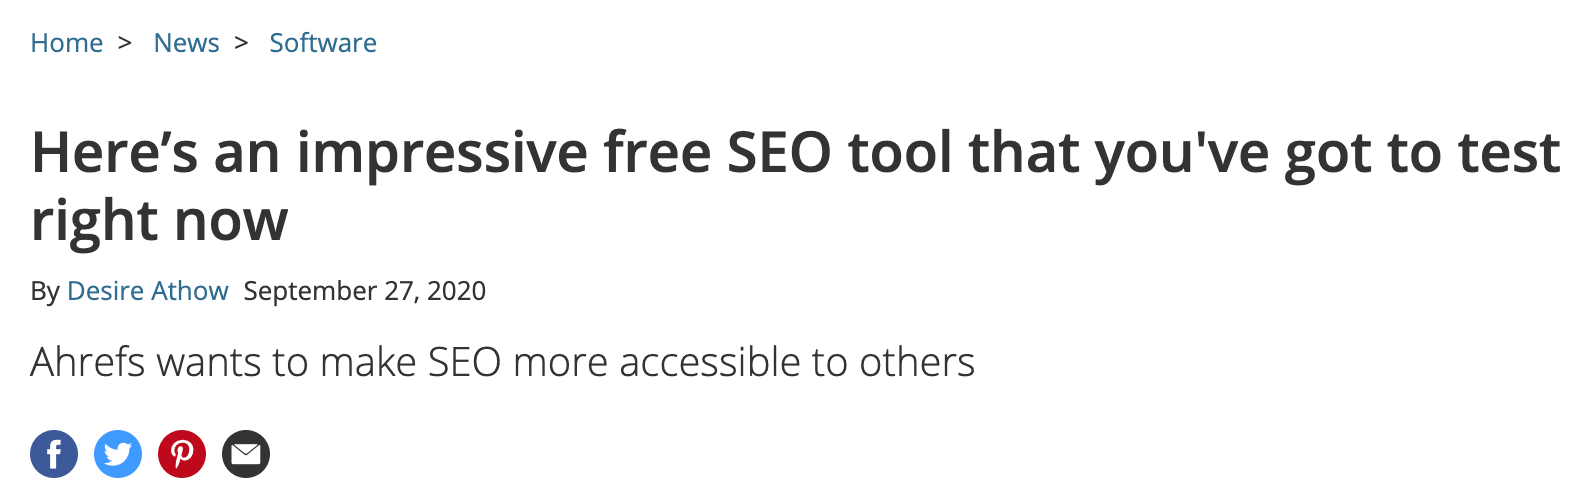 Here s an impressive free SEO tool that you ve got to test right now TechRadar